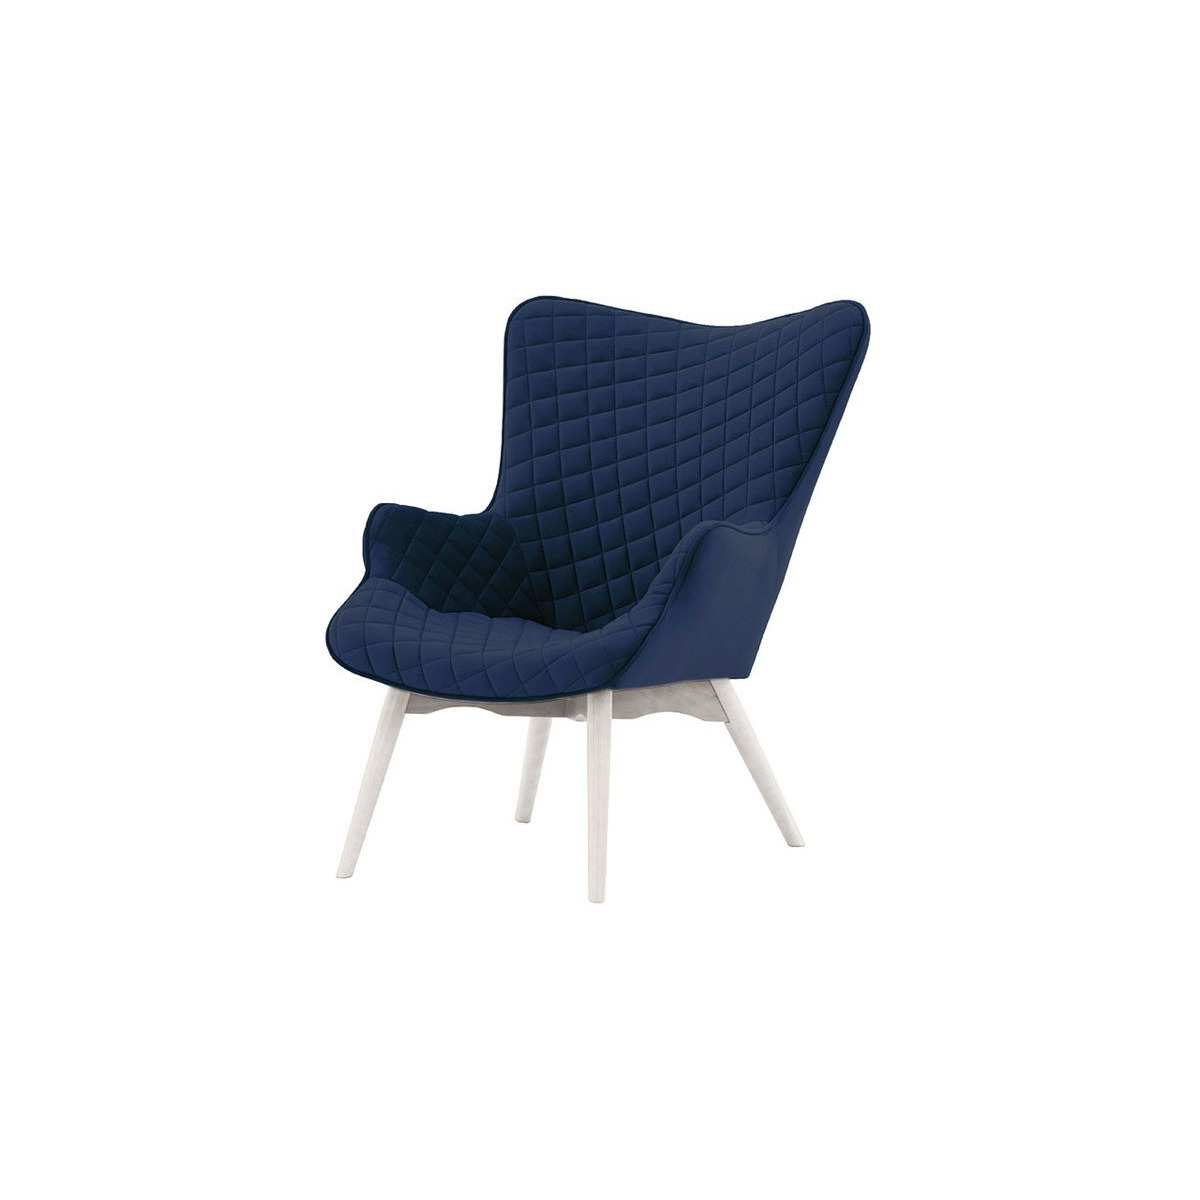 Ducon Velvet Wingback Chair With Stitching, dirty blue, Leg colour: like oak - image 1